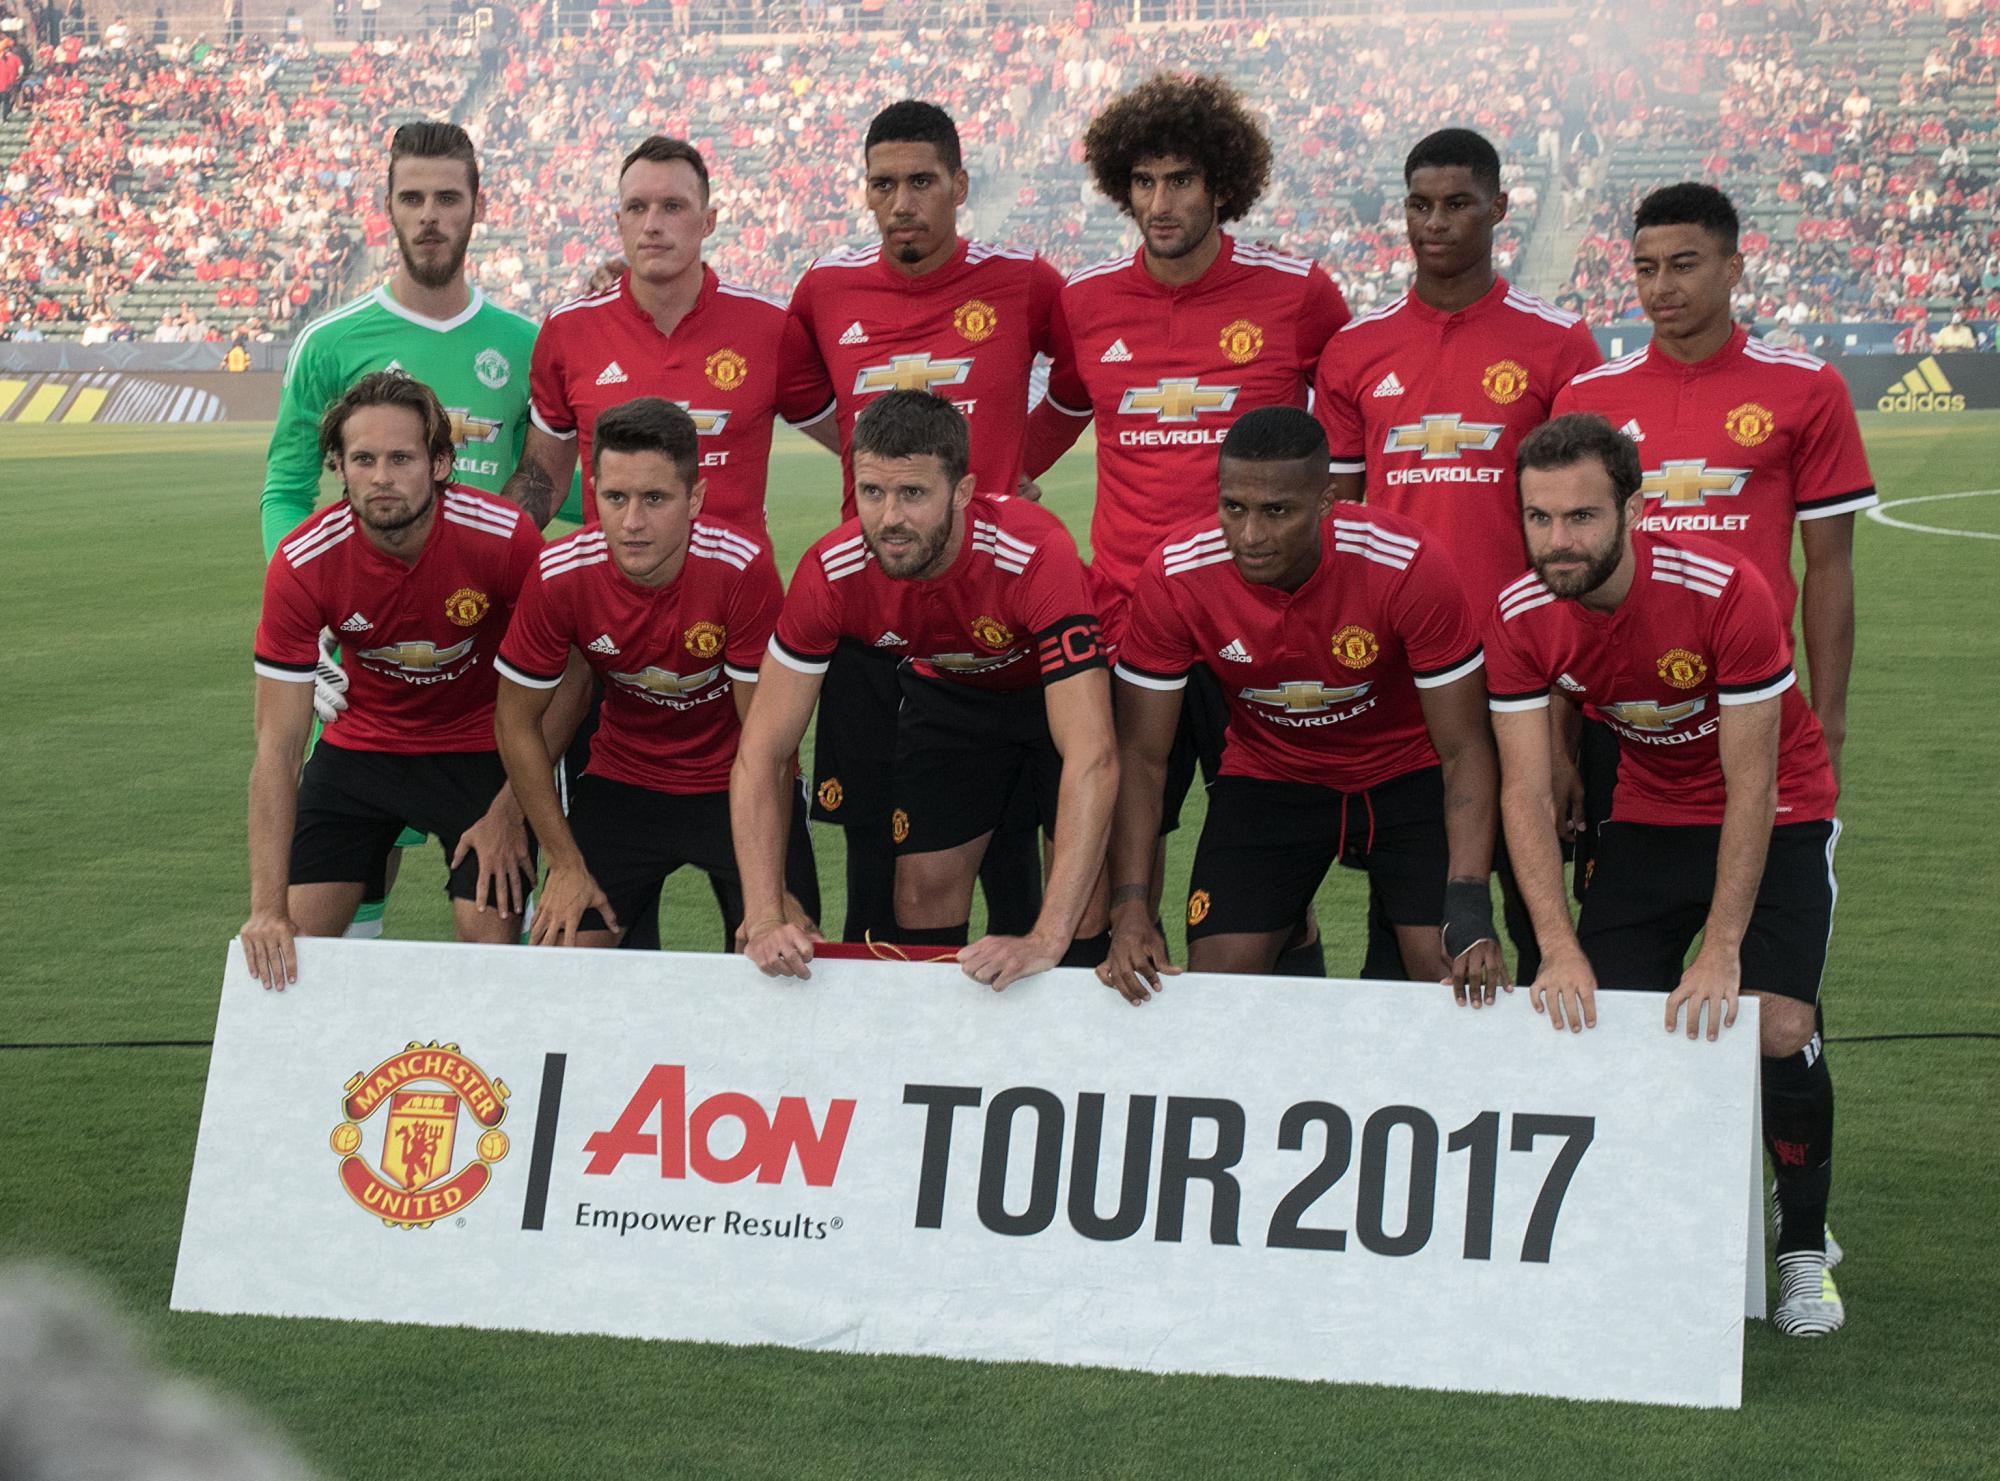 Why The Outcry Over Global Preseason Tours? The Likes Of Manchester